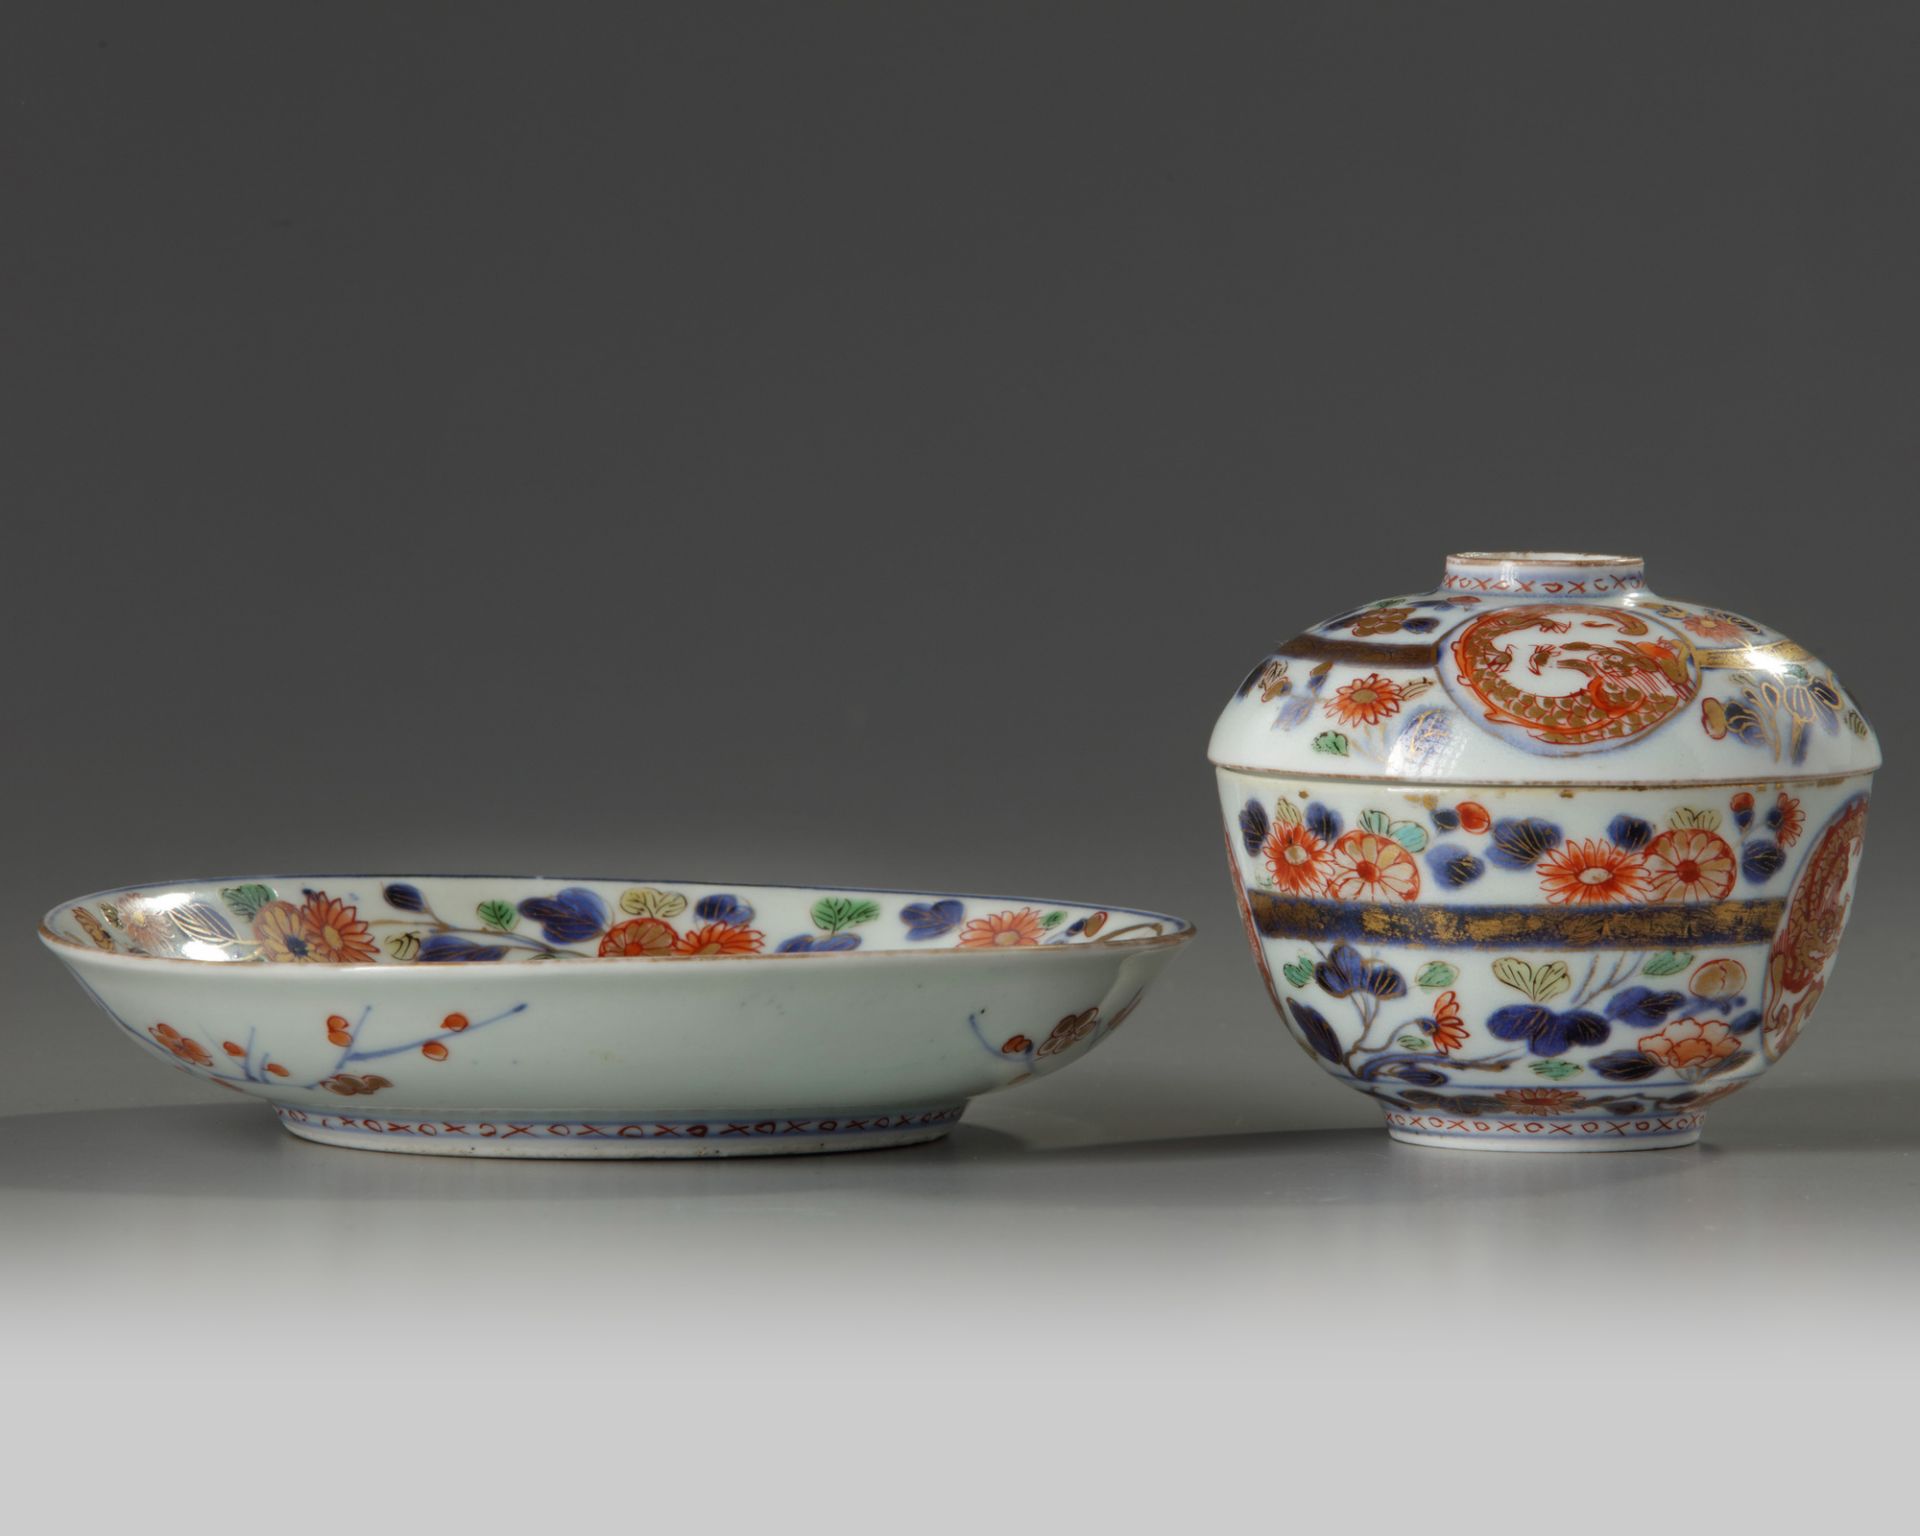 A JAPANESE IMARI TEACUP WITH COVER AND SAUCER, 17TH CENTURY - Image 5 of 6